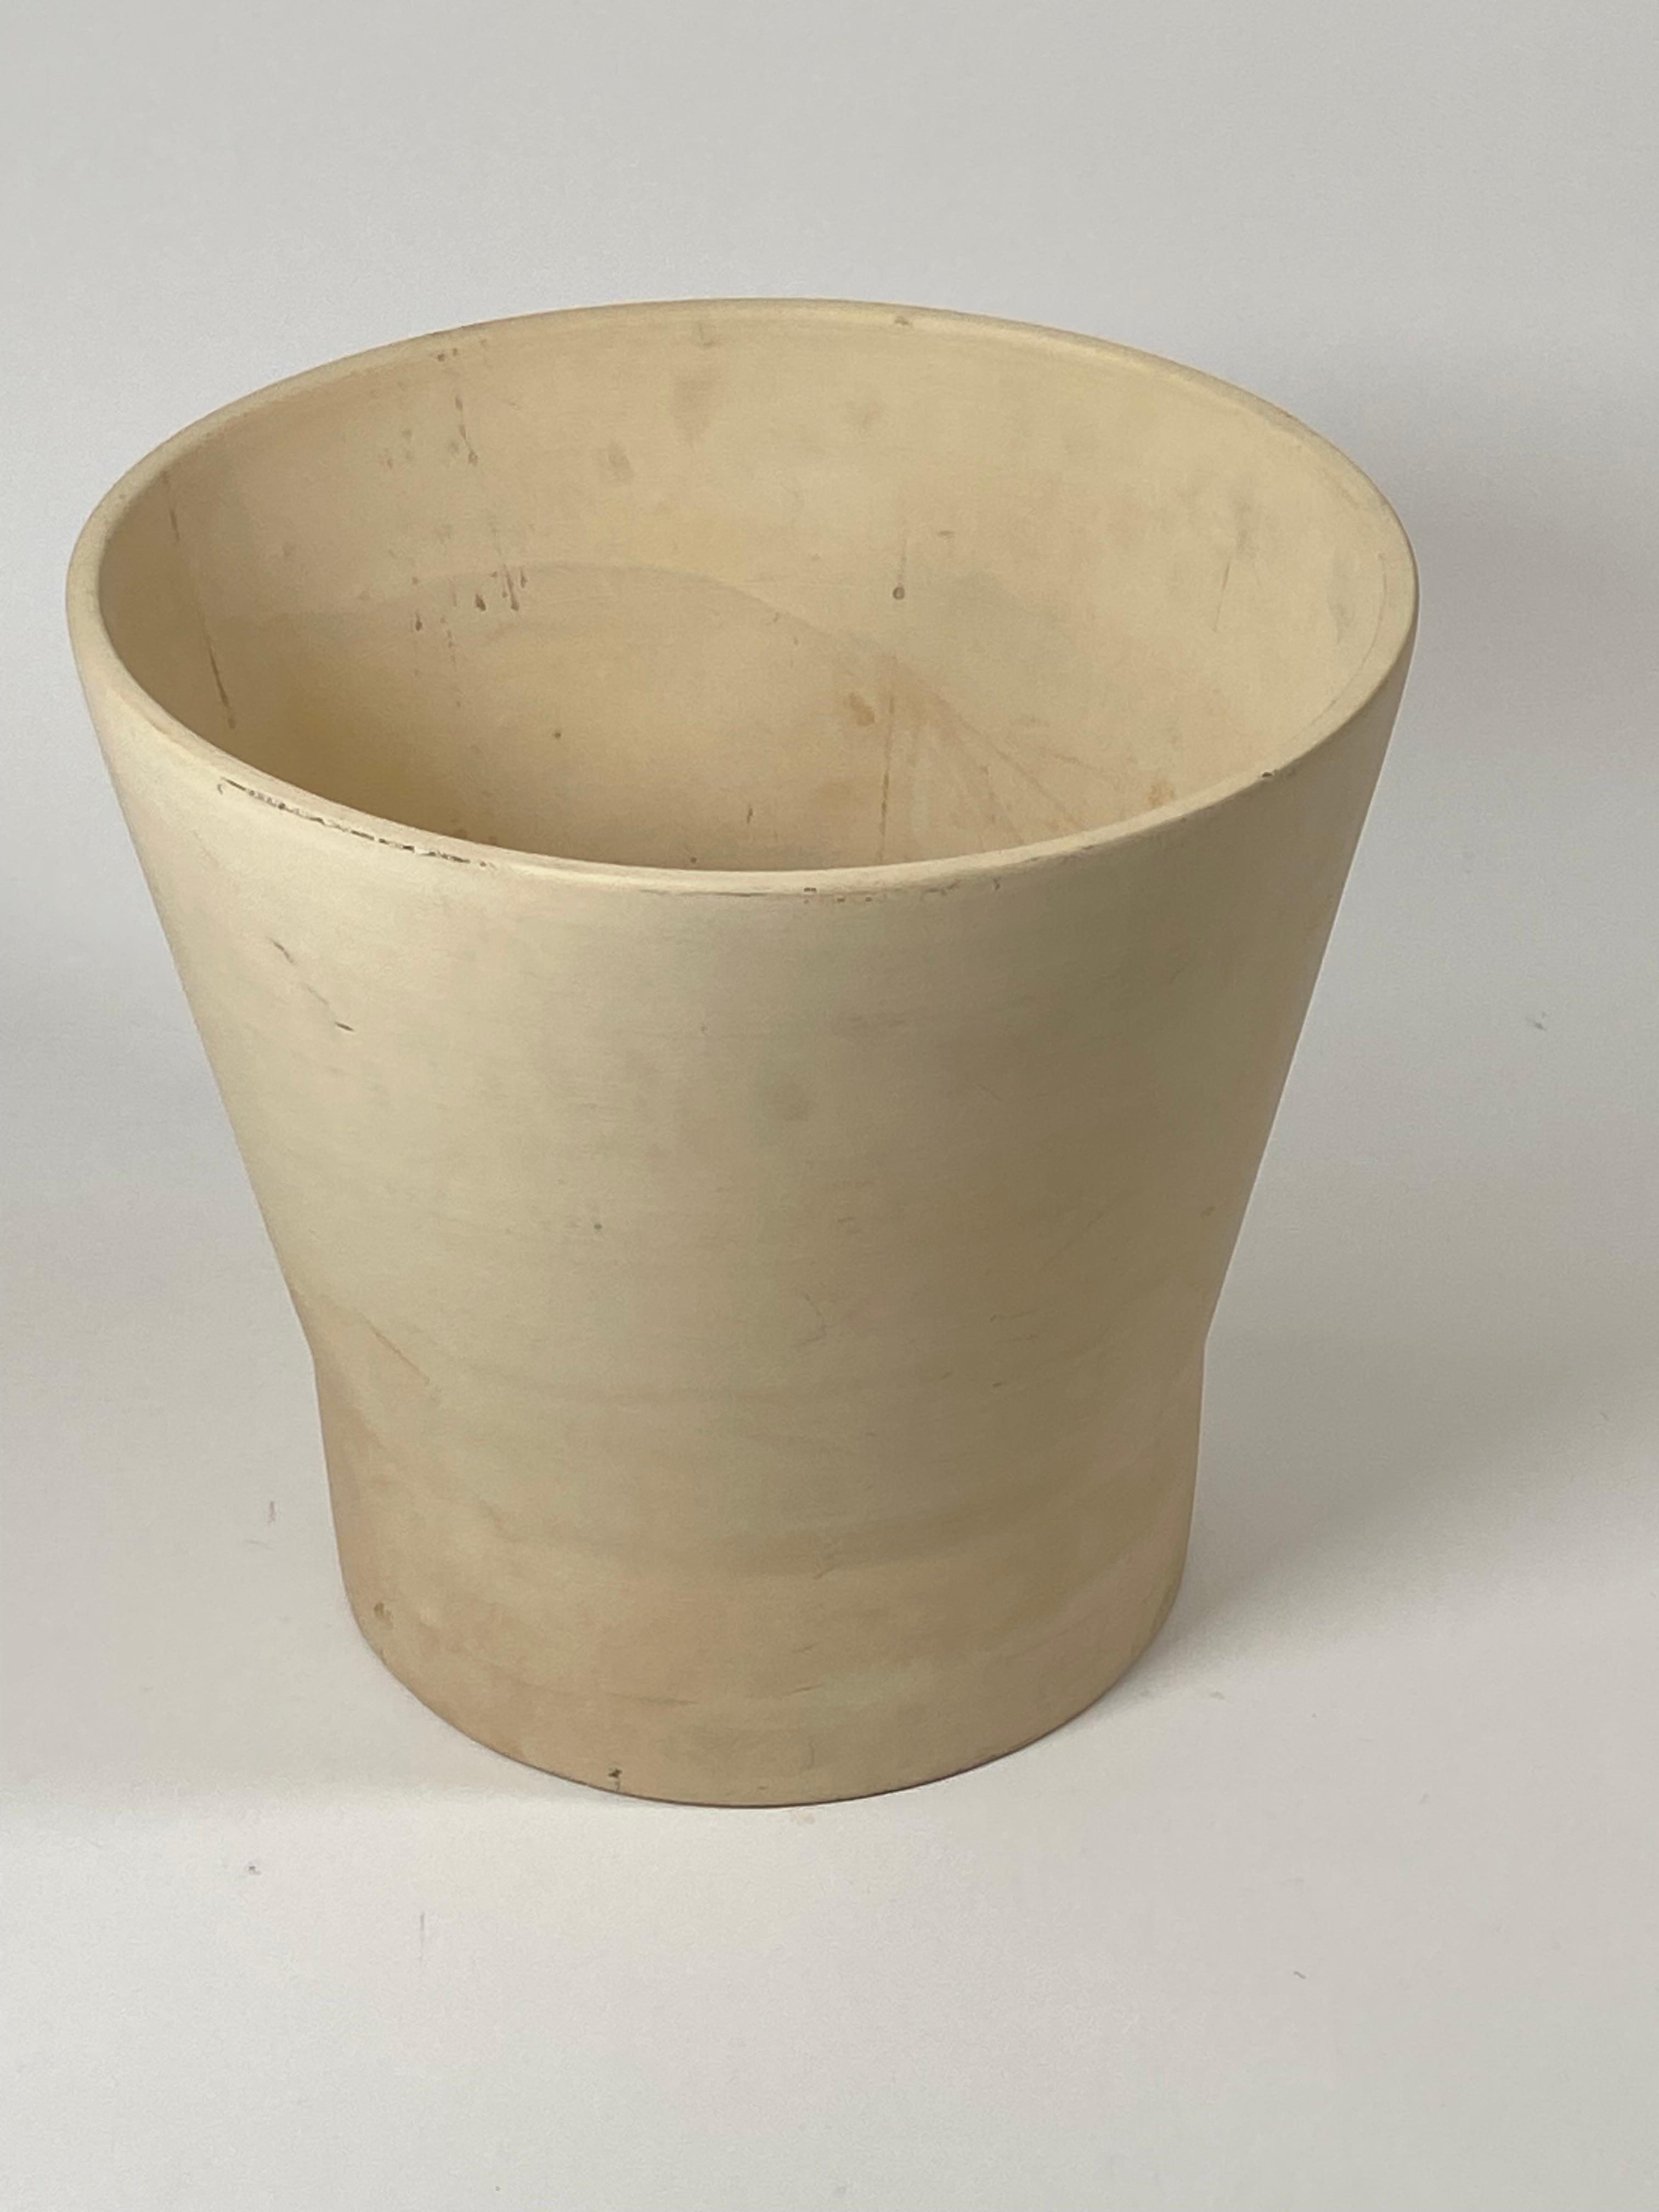 Vintage bisque (unglazed) architecturally designed planter by Gainey Ceramics, the factory has since burnt down but were located in Southern California and one of the biggest ceramics company of planters in the nation. This planter has a conical